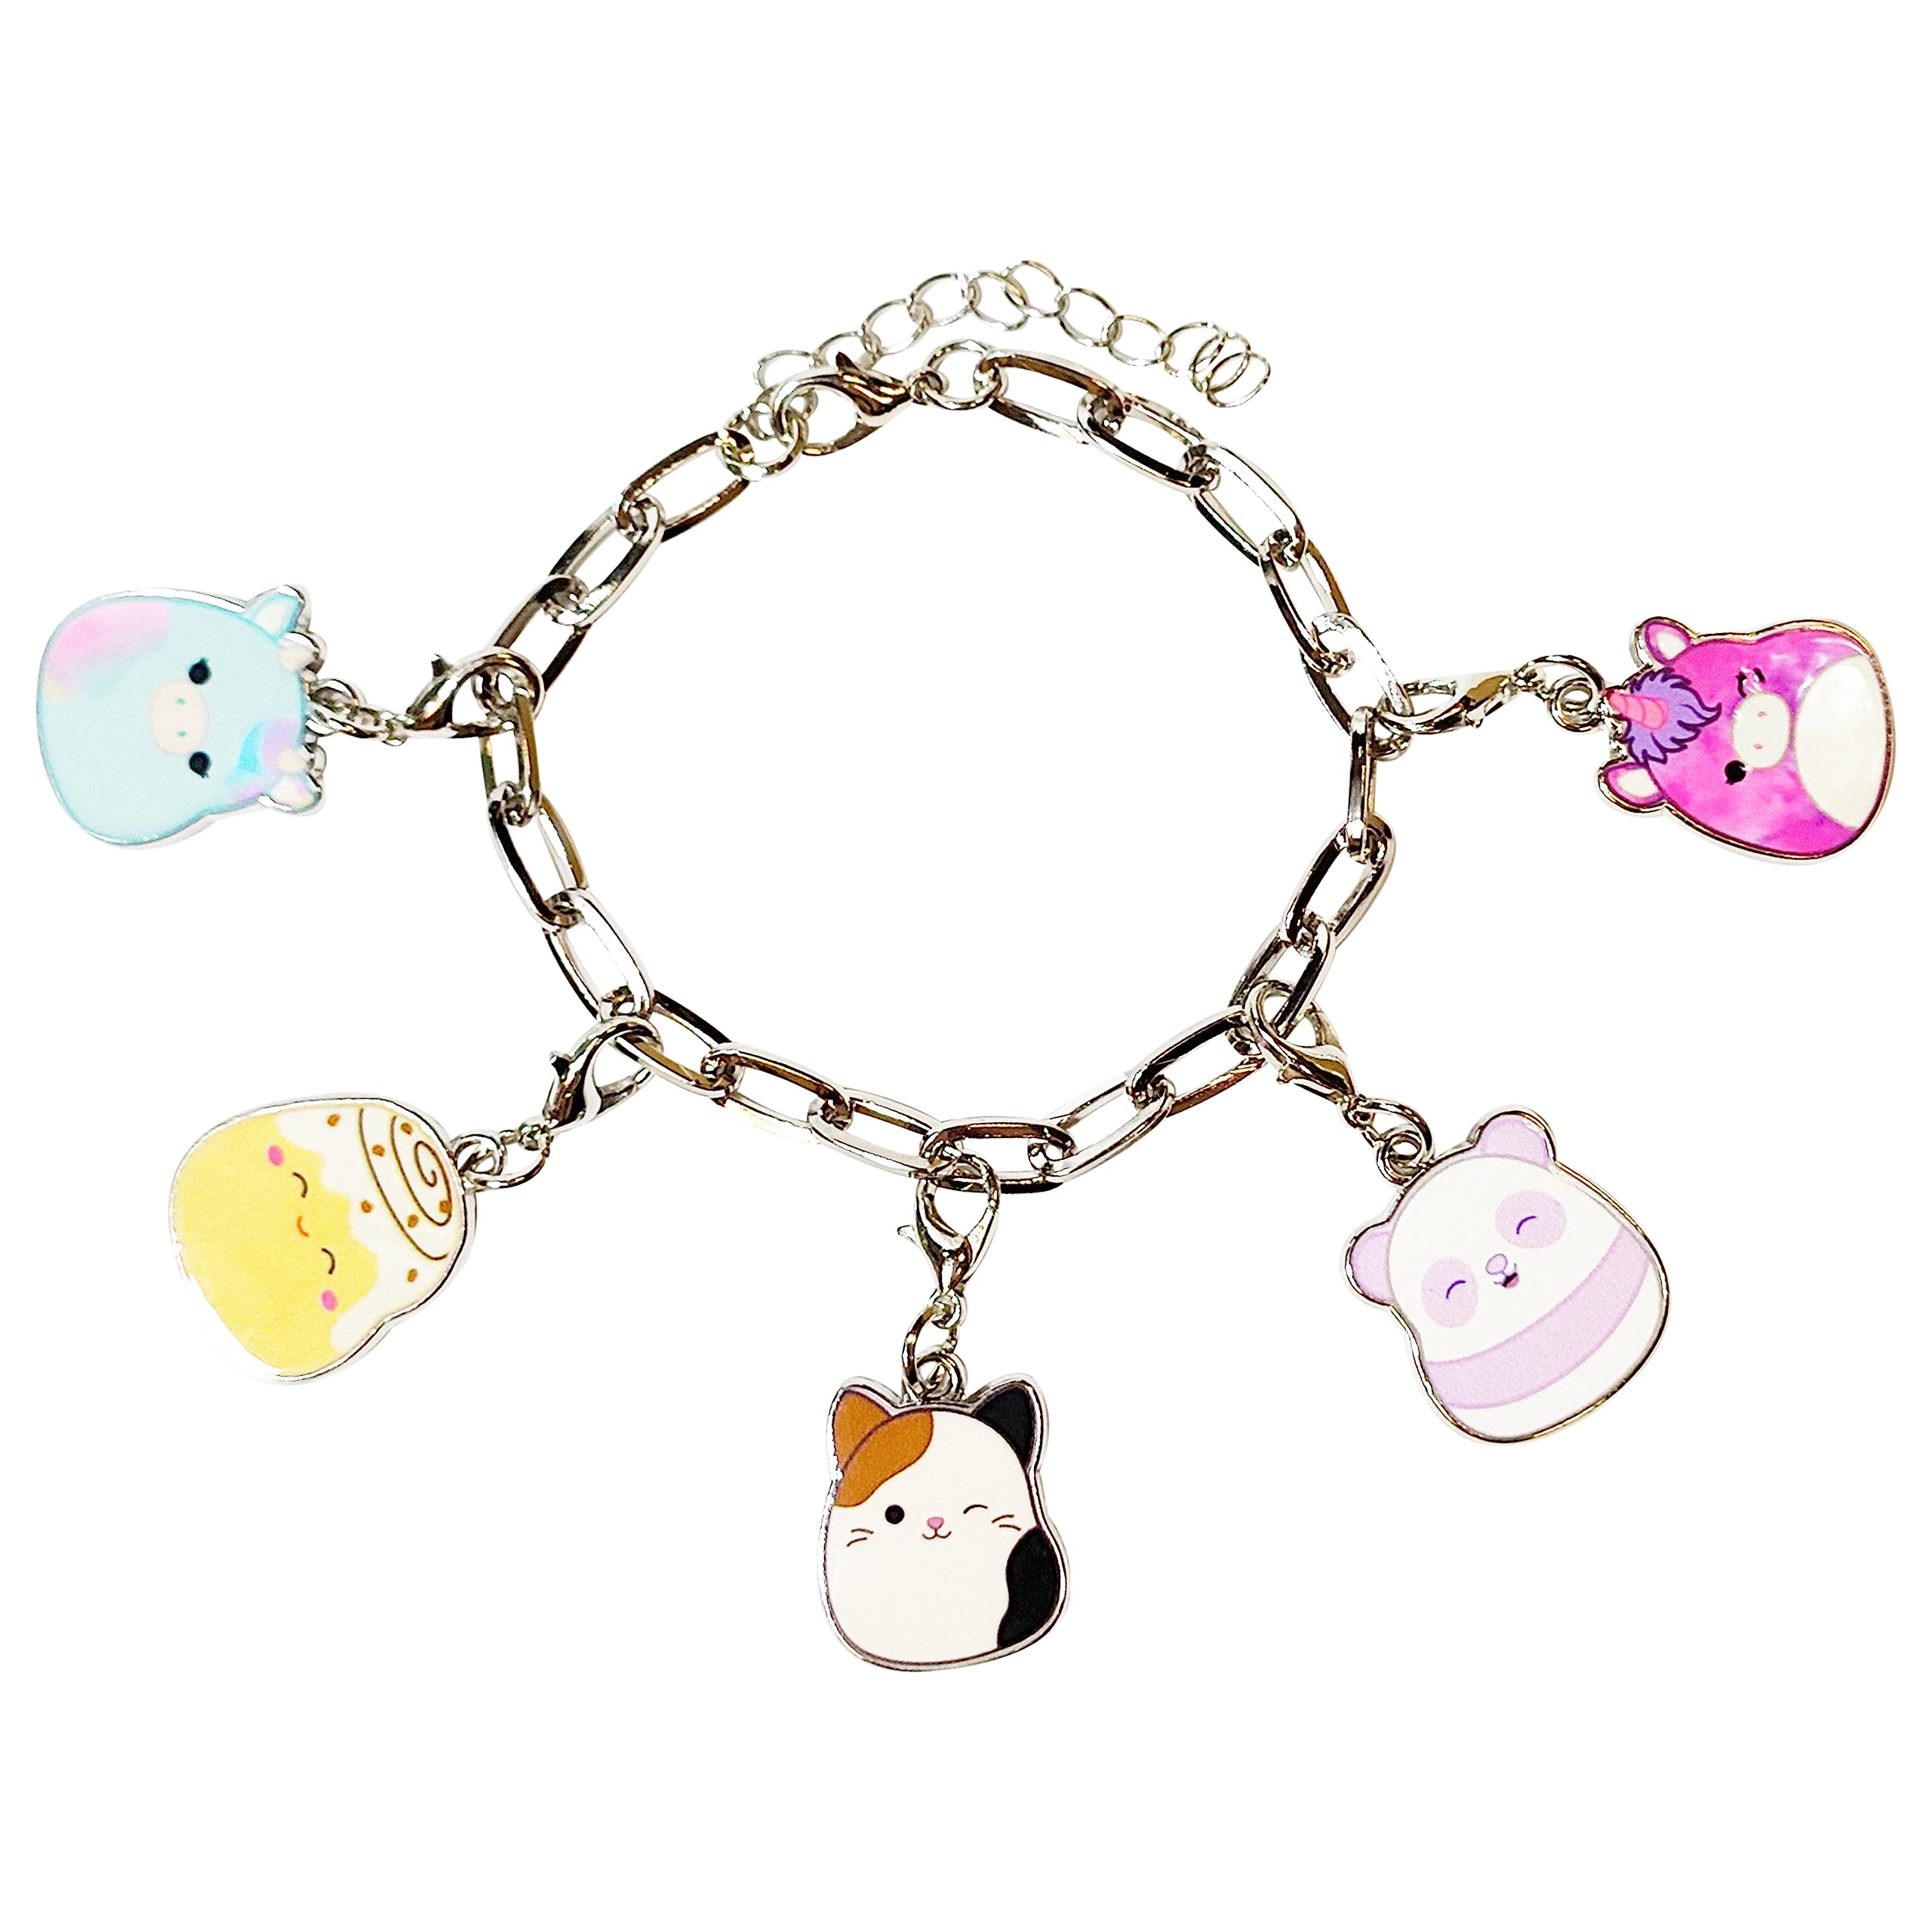 LUV HER Squishmallow Girls Add A Charm Box Set with 1 Charm Bracelet & 5 Interchangeable Charms - Ages 3+